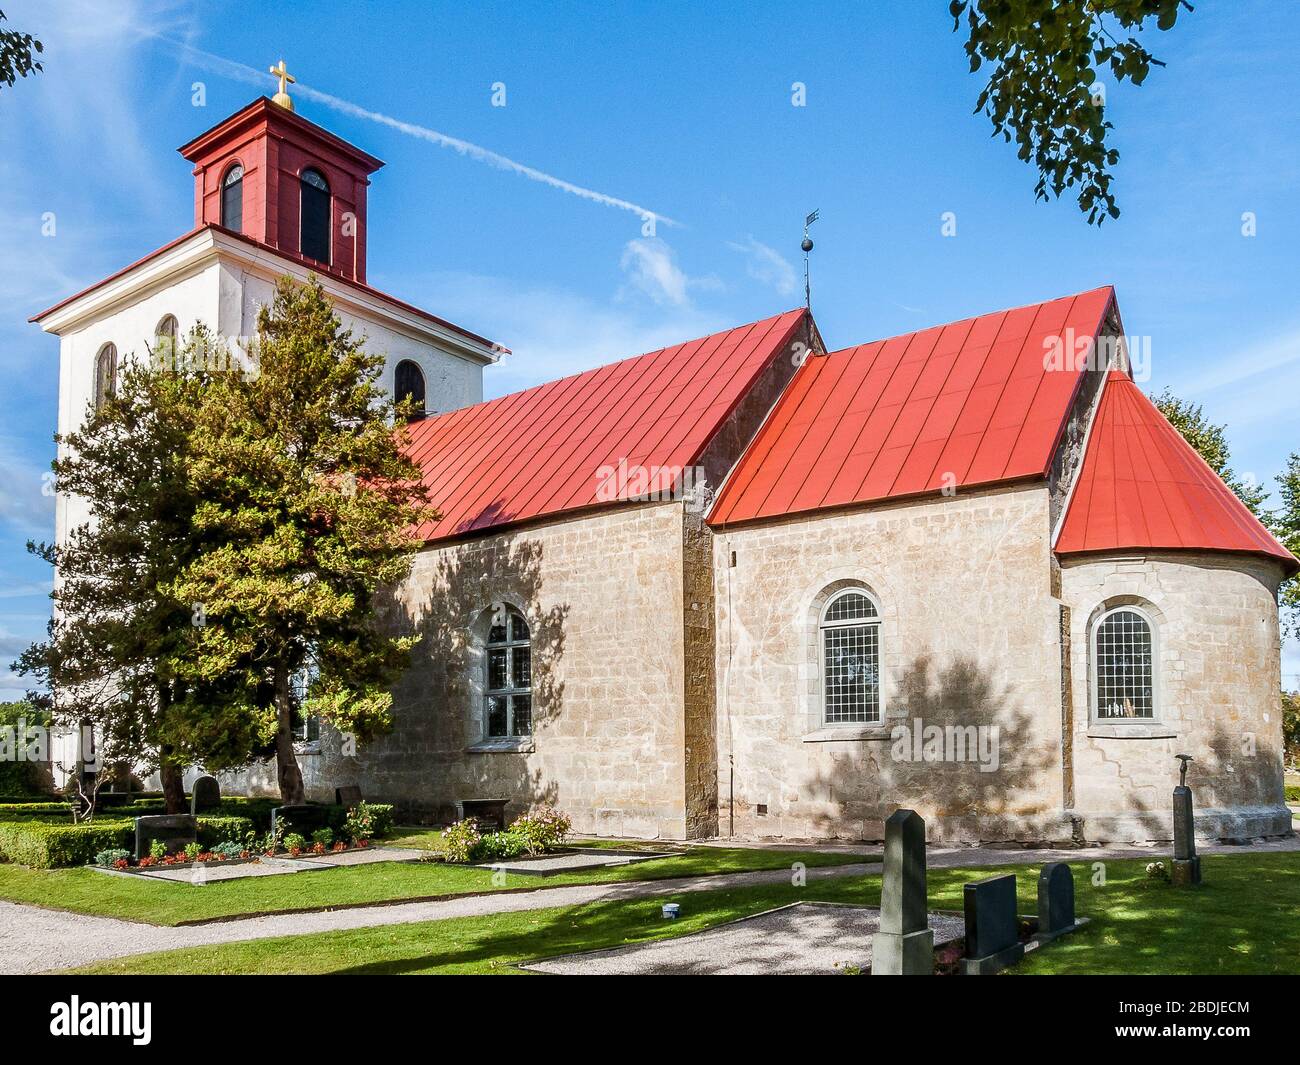 Rural Church with a big tower in N. Stro, Sweden, October 9, 2009 Stock Photo